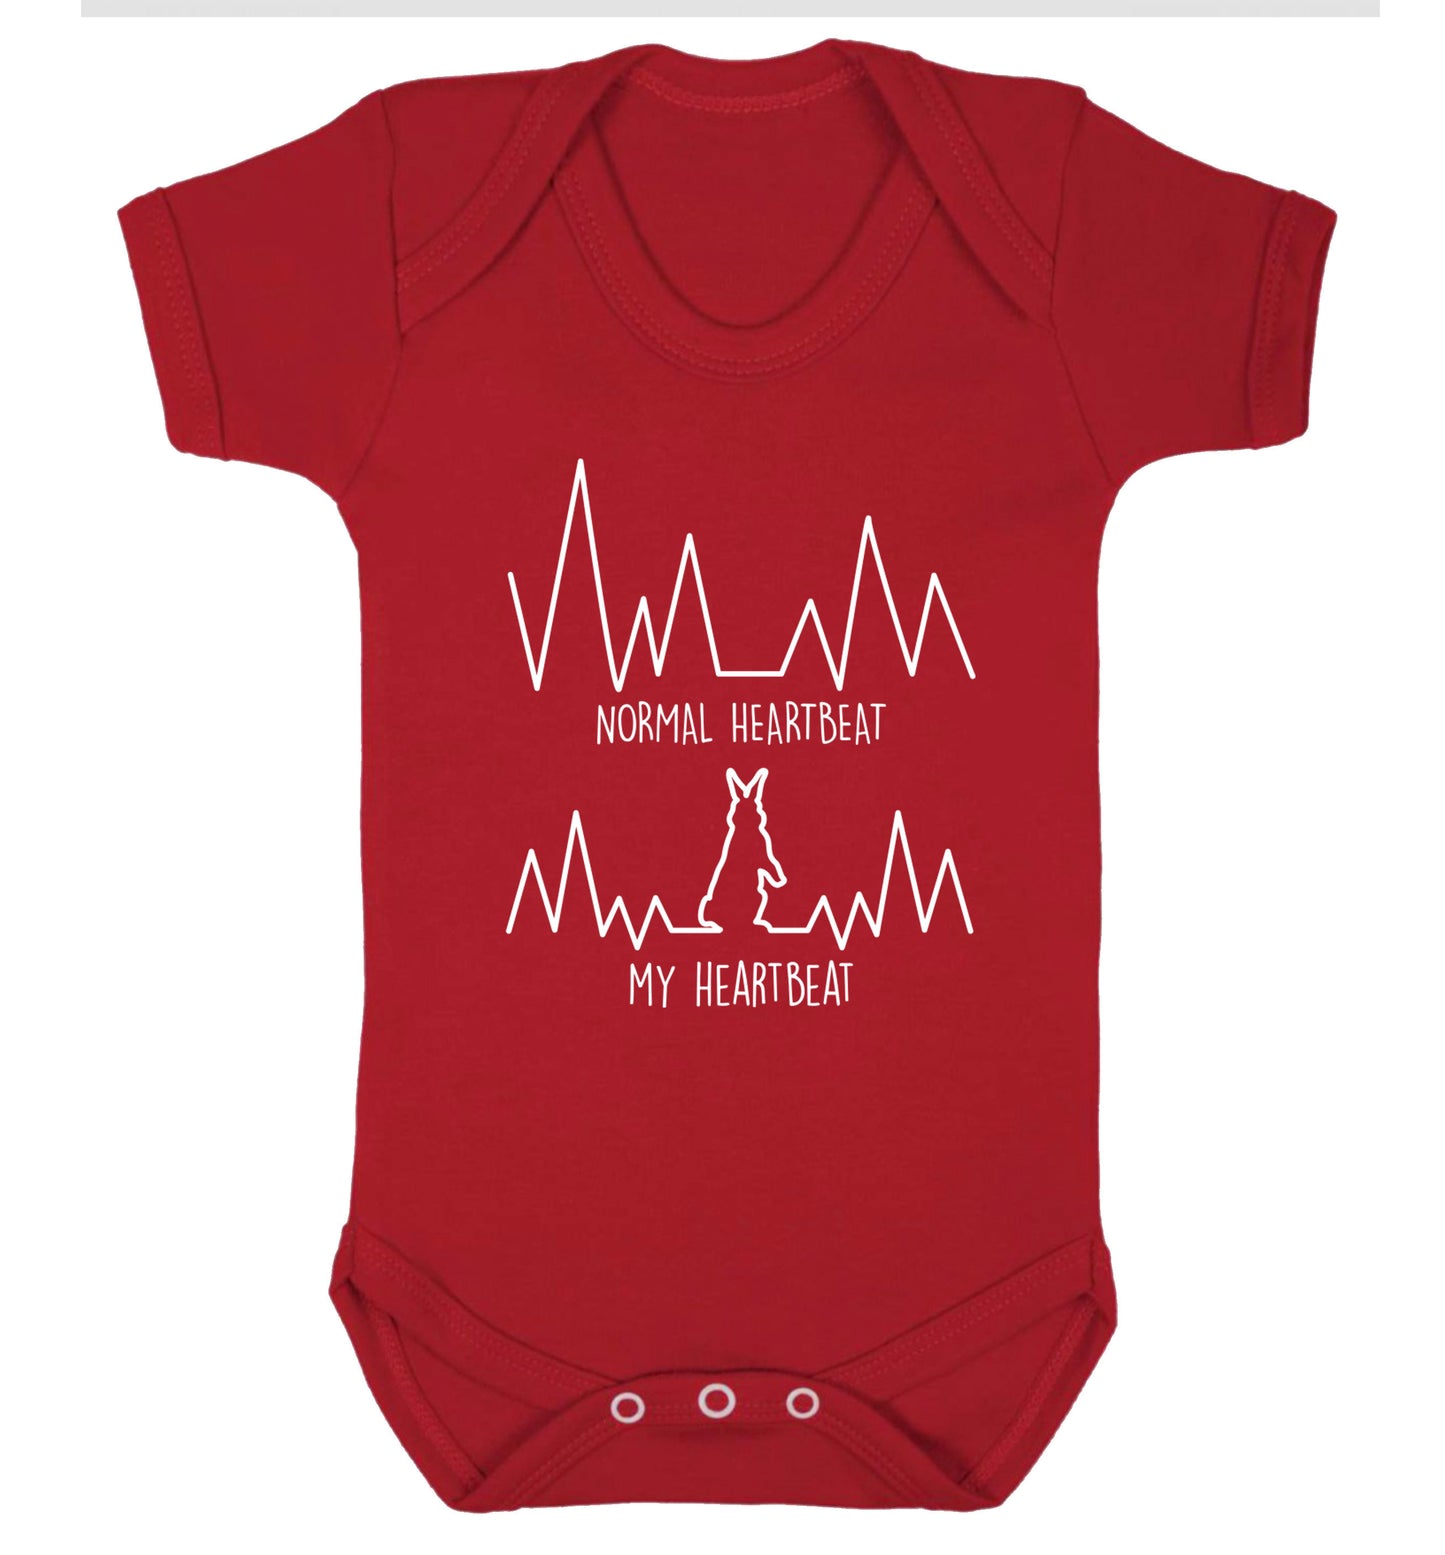 Normal heartbeat, my heartbeat rabbit lover Baby Vest red 18-24 months